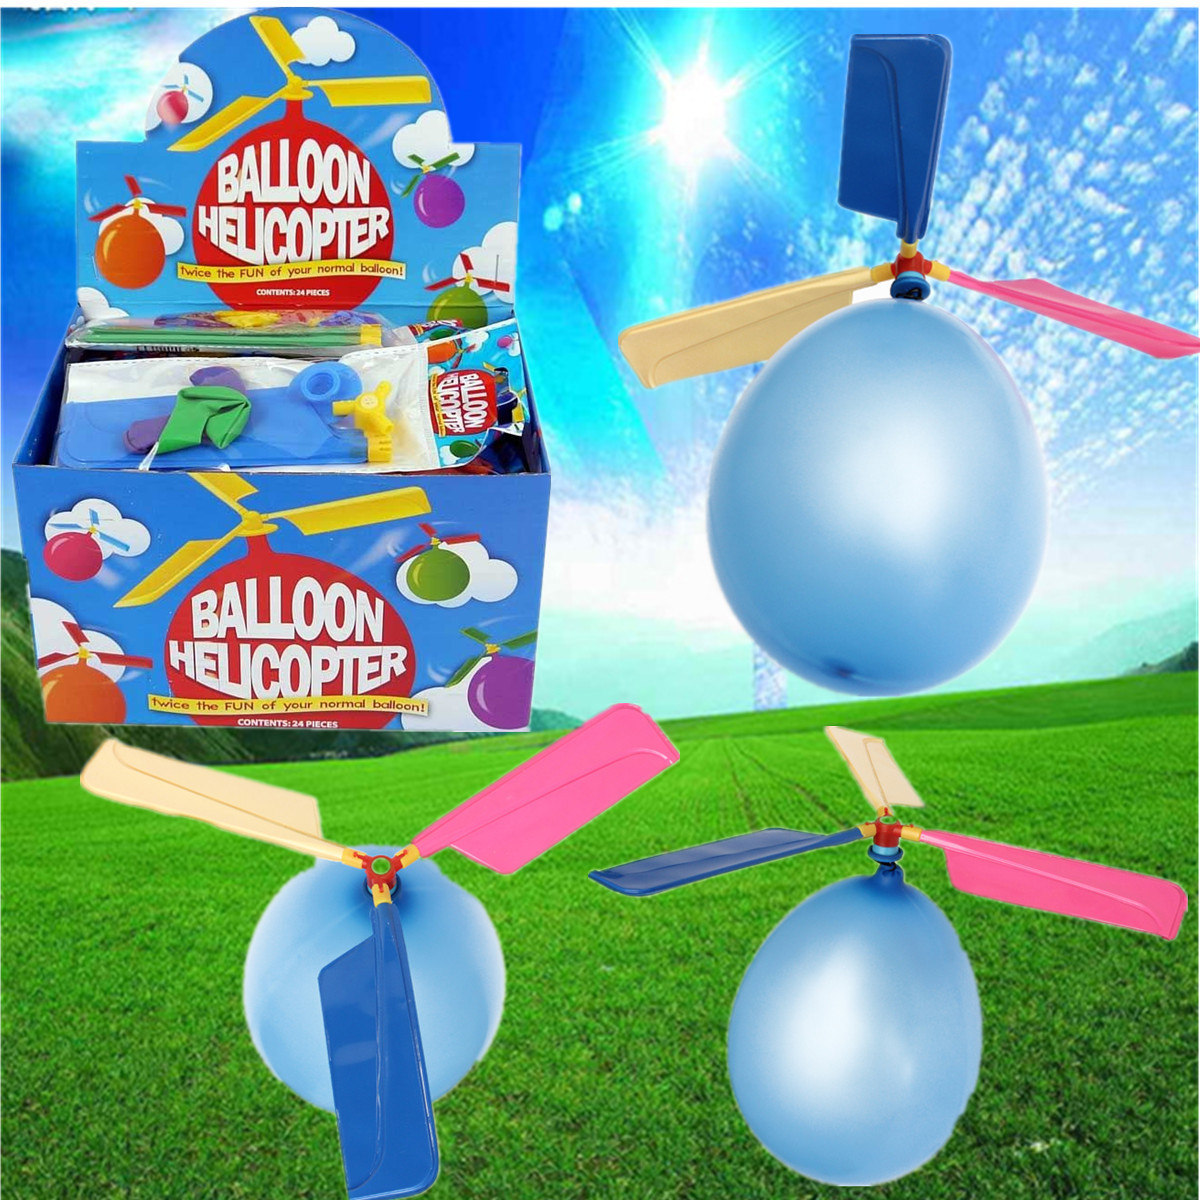 20X Colorful Traditional Classic Balloon Helicopter Portable Flying Toy educational toy - Random color